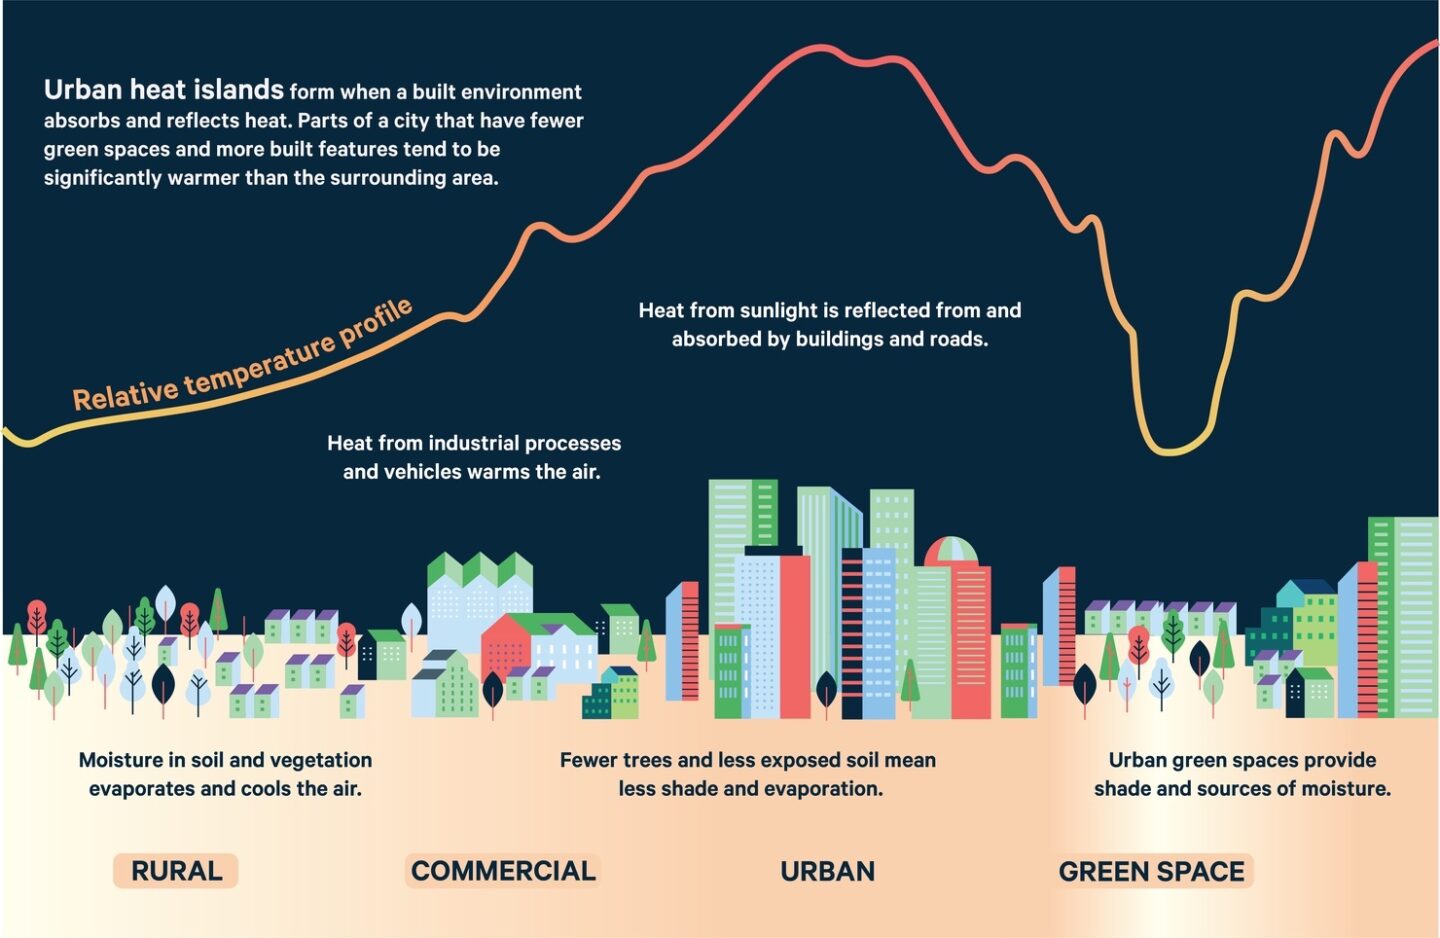 graphic that reads "urban heat islands form when a built environment absorbs and reflects heat. Parts of a city that have fewer green spaces and more built features tend to be significantly warmer than the surrounding area"